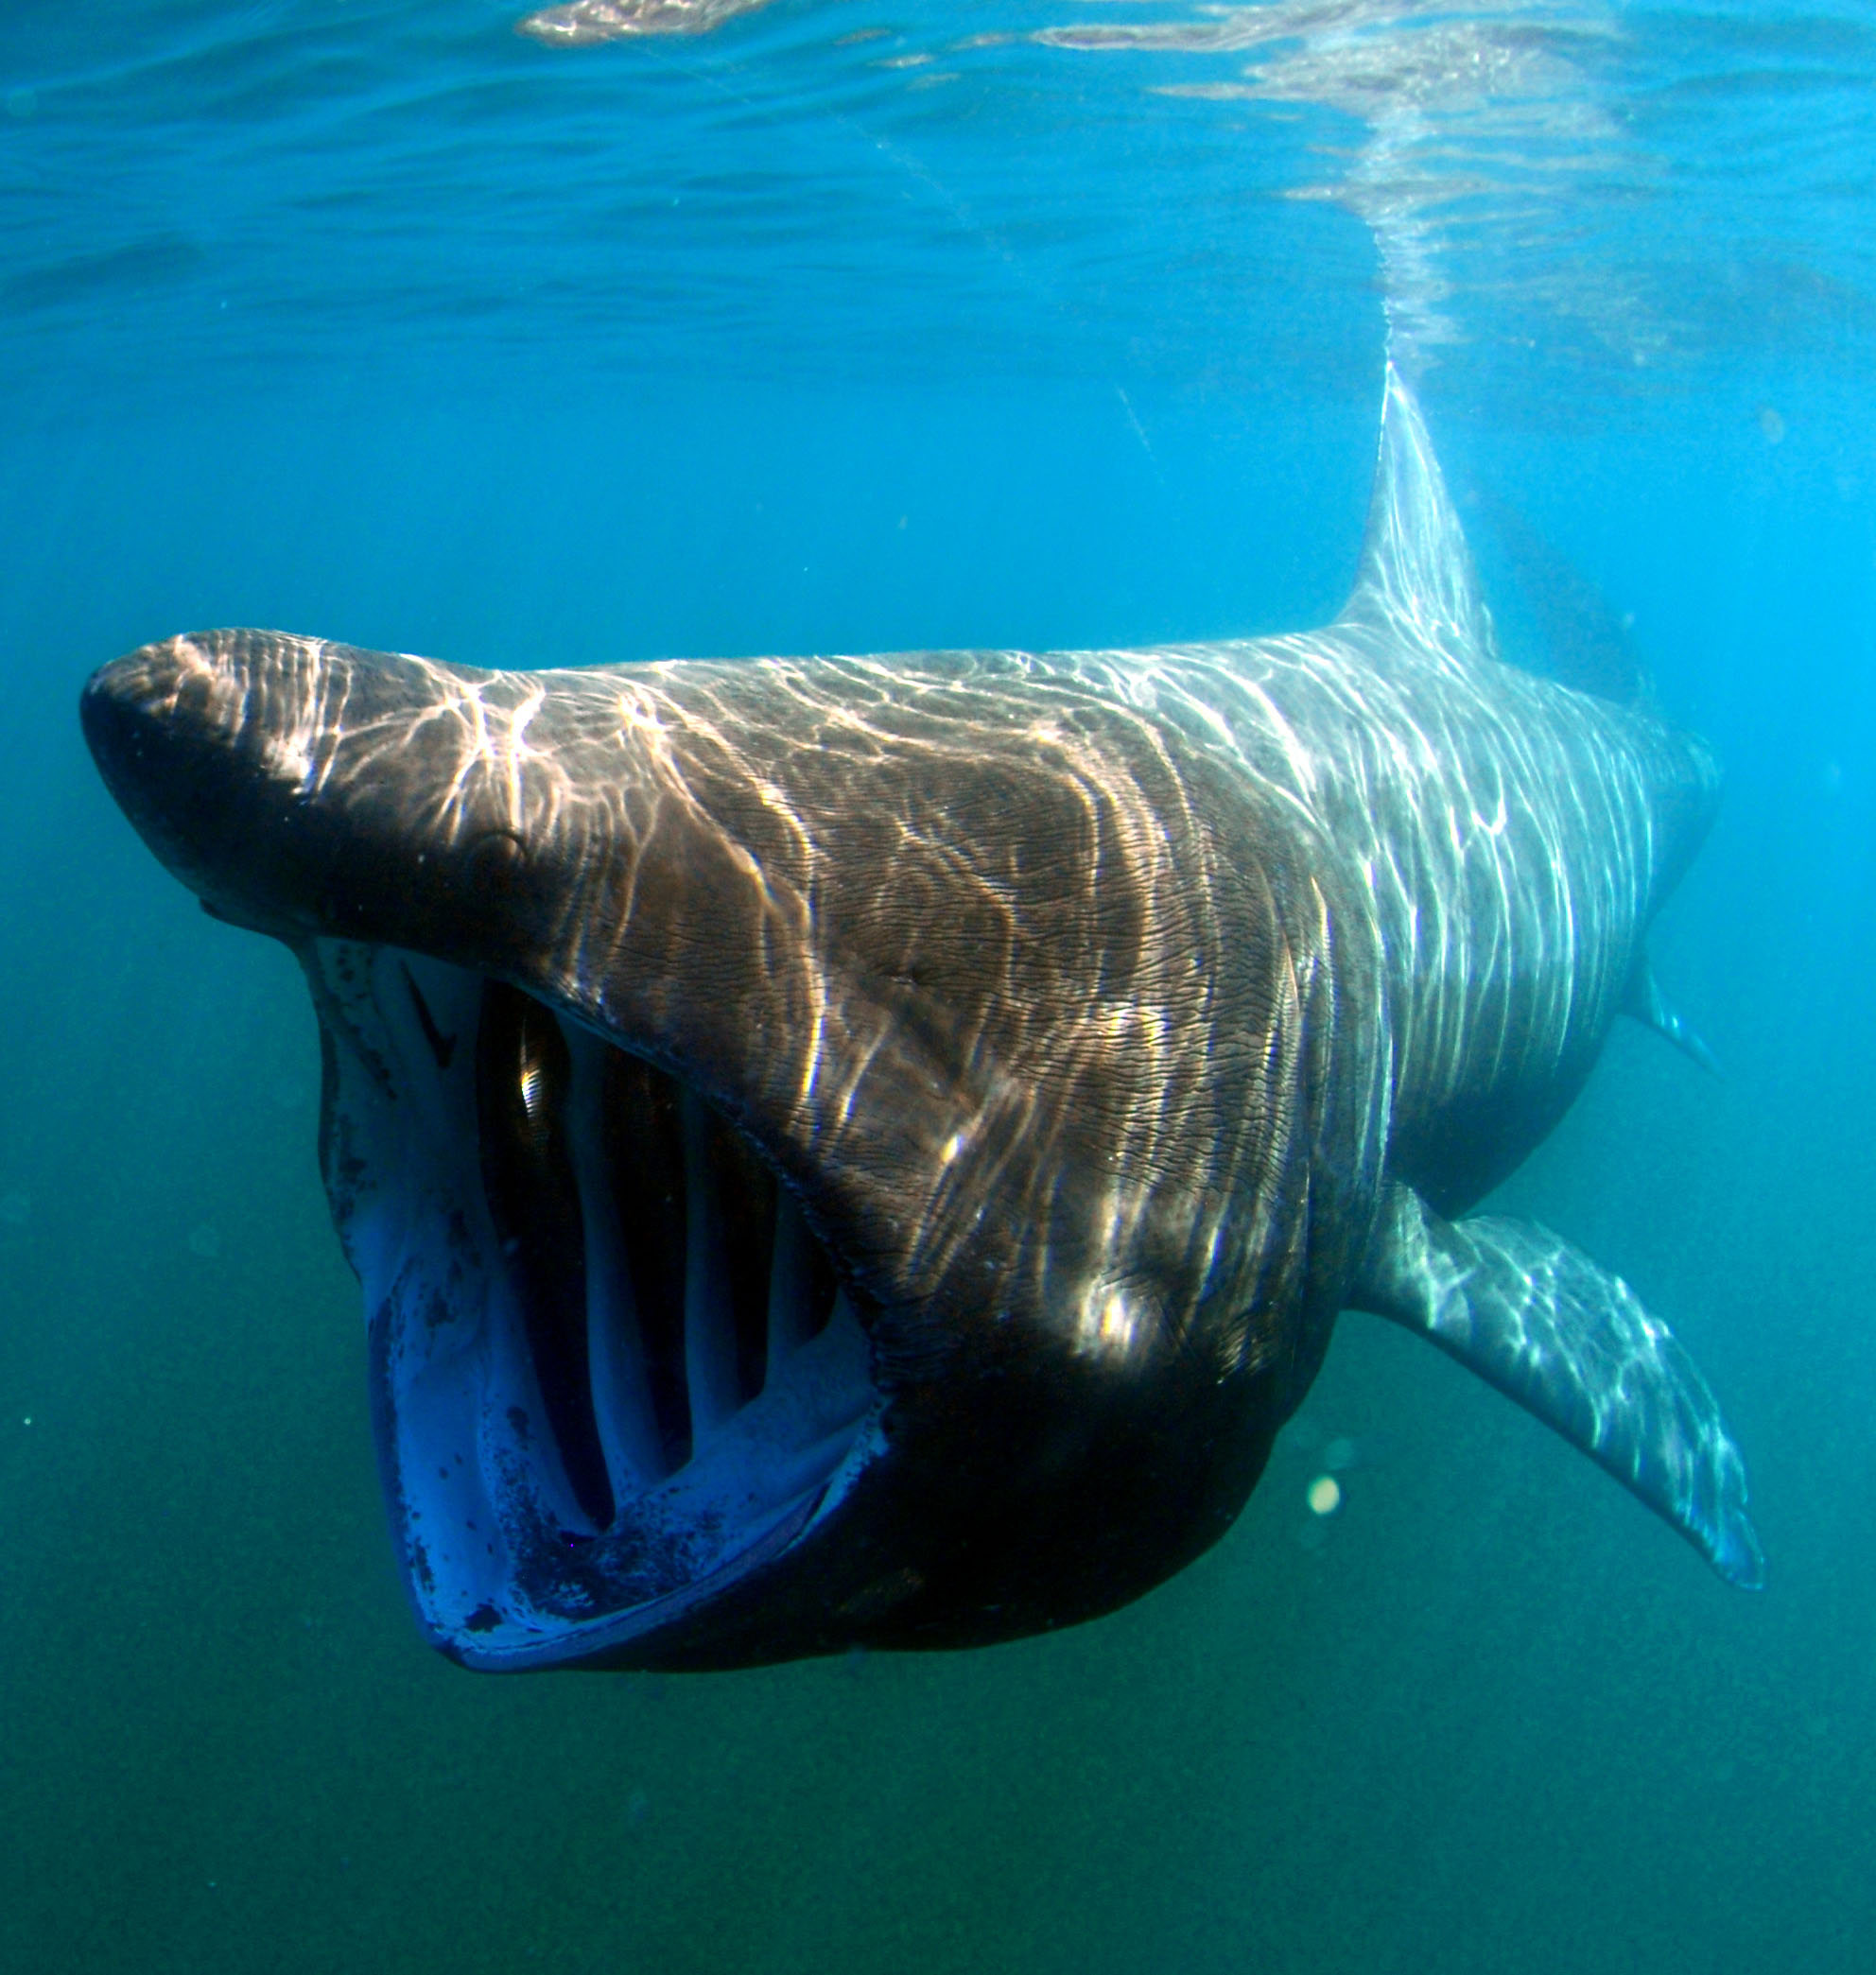 A sun-dappled basking shark swims towards the camera with its huge mouth open.